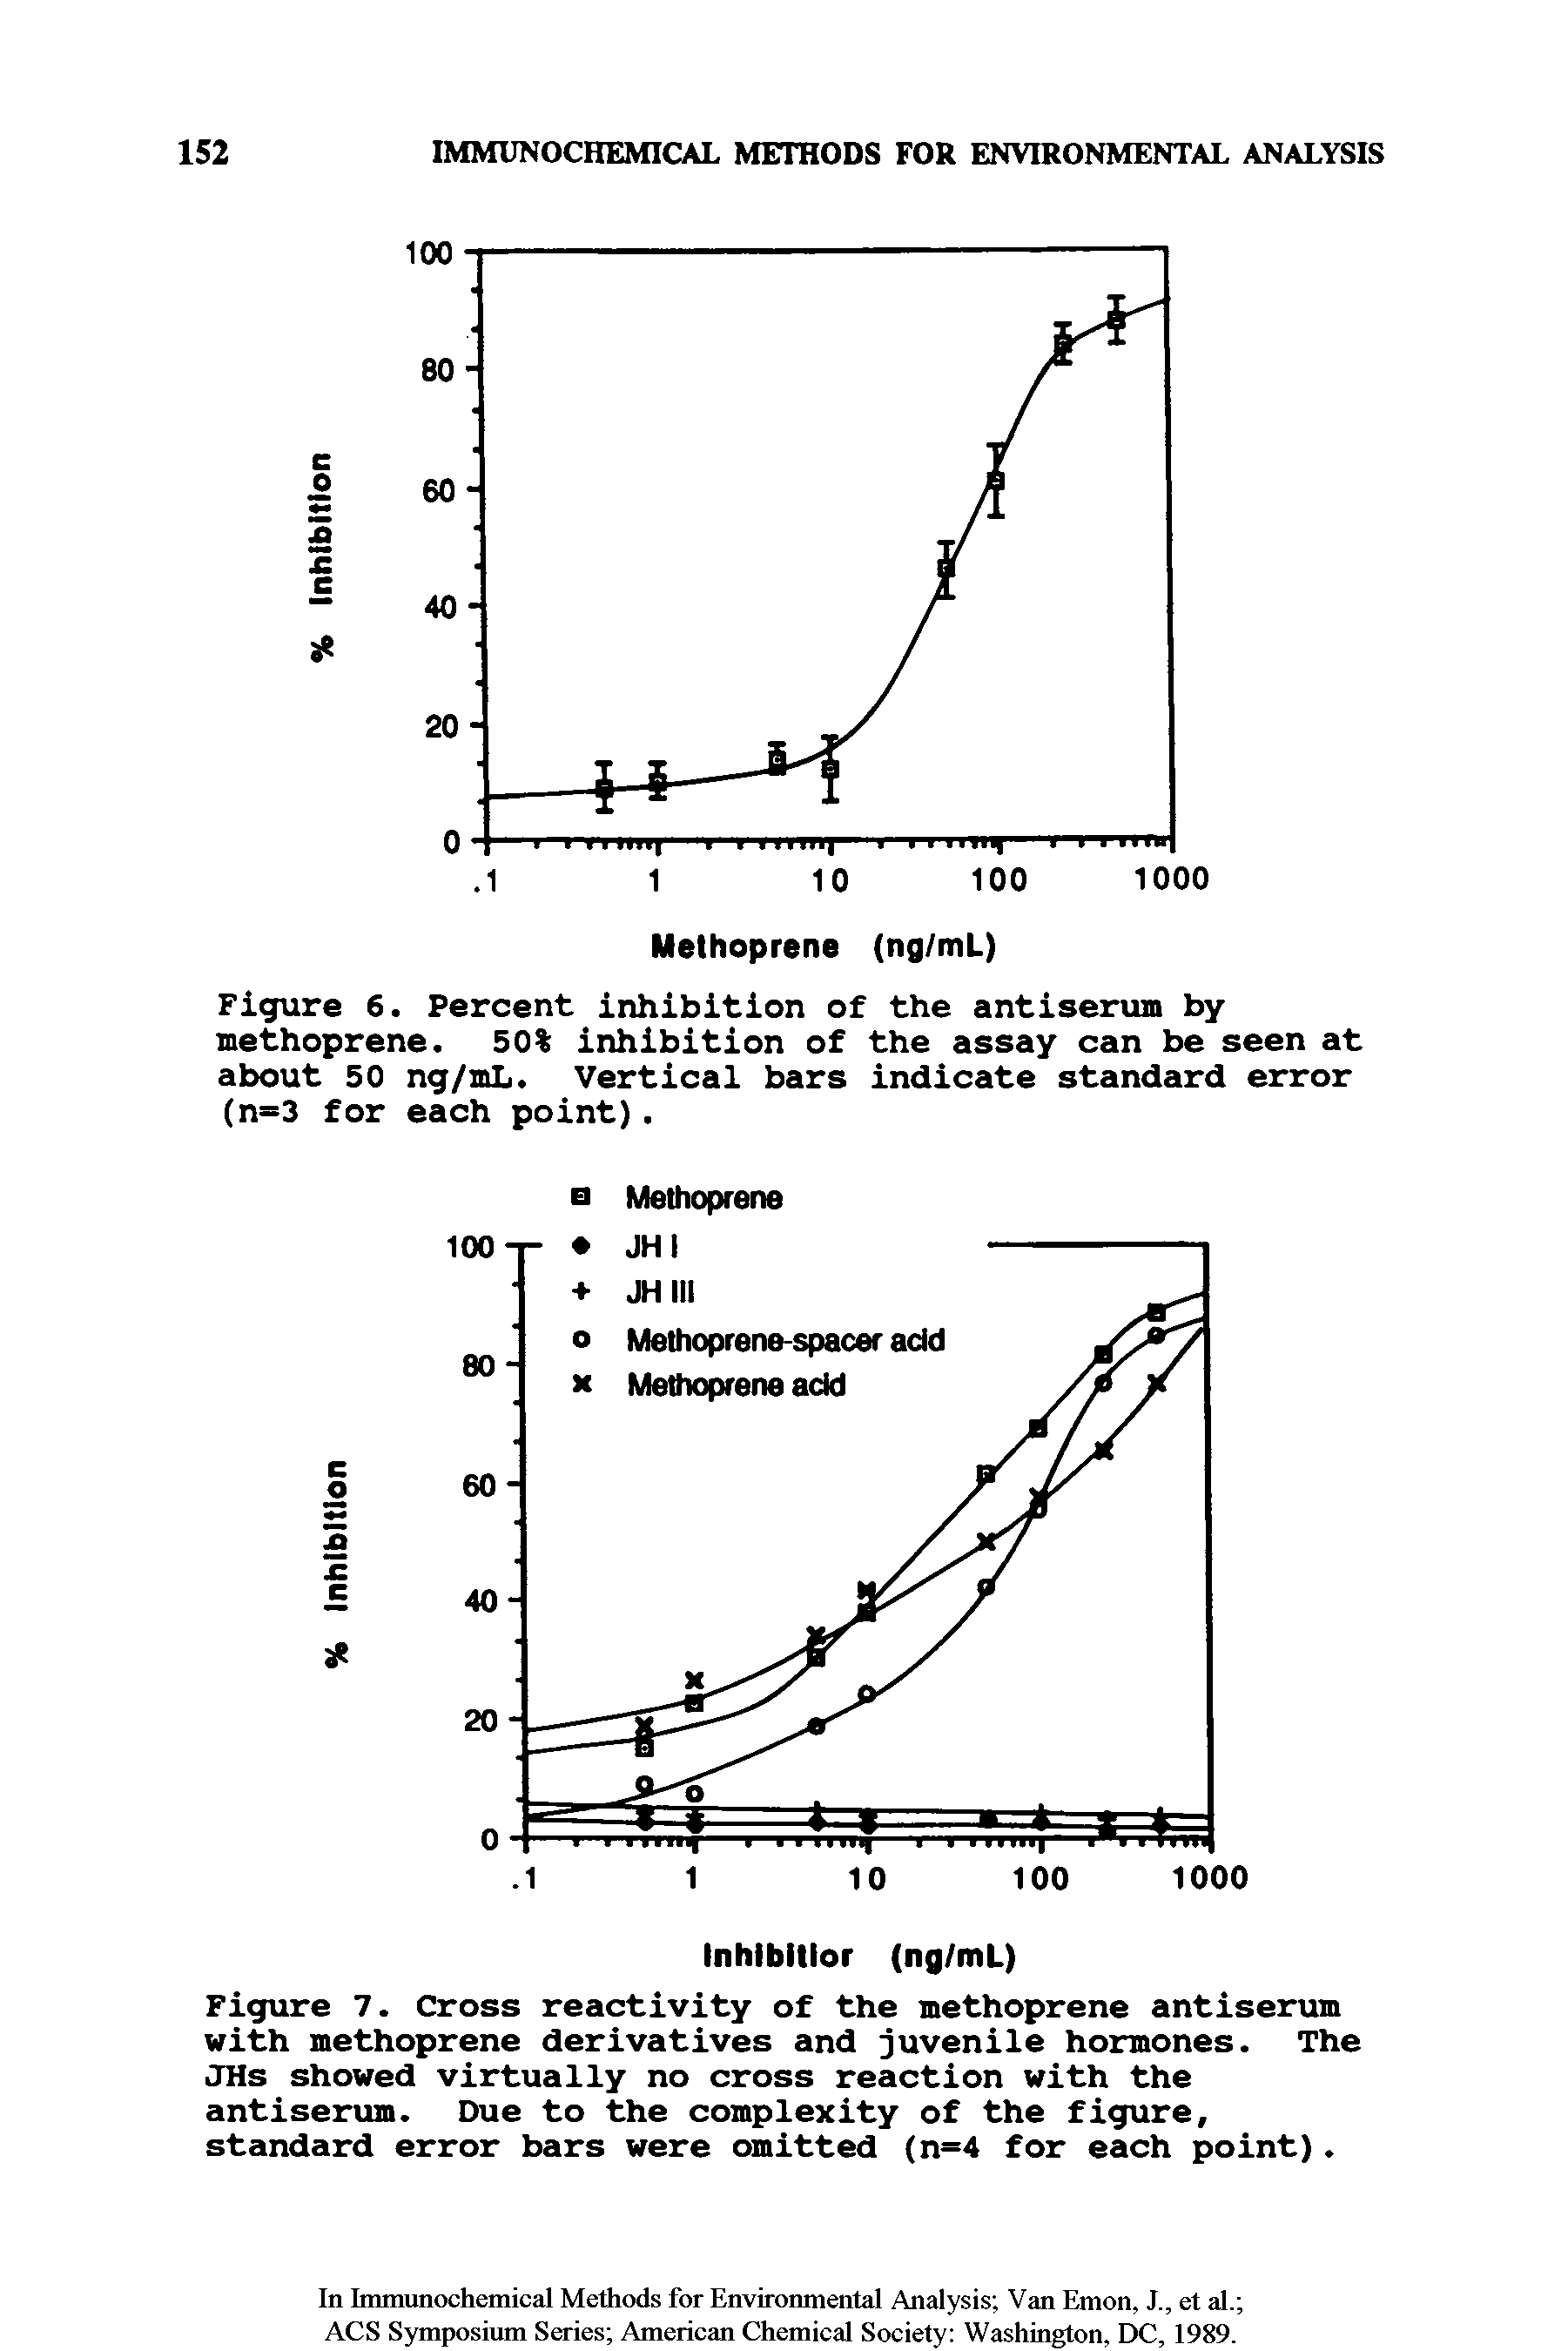 Figure 6. Percent inhibition of the antiserum by methoprene. 50% inhibition of the assay can be seen at about 50 ng/mL. Vertical bars indicate standard error (n=3 for each point).